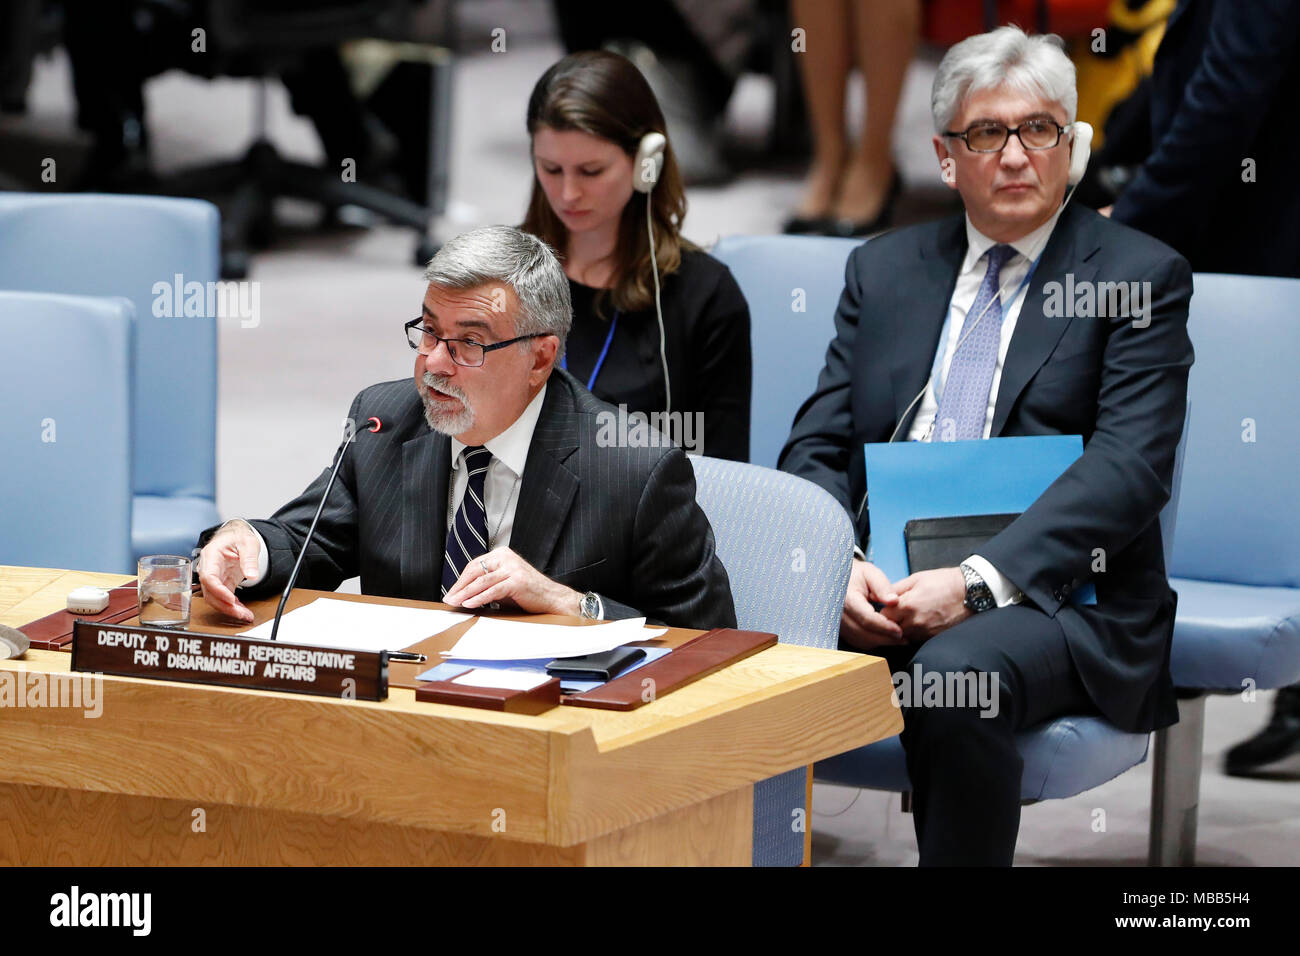 United Nations, UN Security Council meeting on the situation in Syria at the UN headquarters in New York. 9th Apr, 2018. Thomas Markram (front), deputy to United Nations Undersecretary-General for Disarmament Affairs Izumi Nakamitsu, briefs the UN Security Council meeting on the situation in Syria at the UN headquarters in New York, April 9, 2018. The Security Council held an emergency session on the situation in Syria, particularly after reports of the use of chemical weapons over the weekend in rebel-held Douma near the capital city of Damascus. Credit: Li Muzi/Xinhua/Alamy Live News Stock Photo